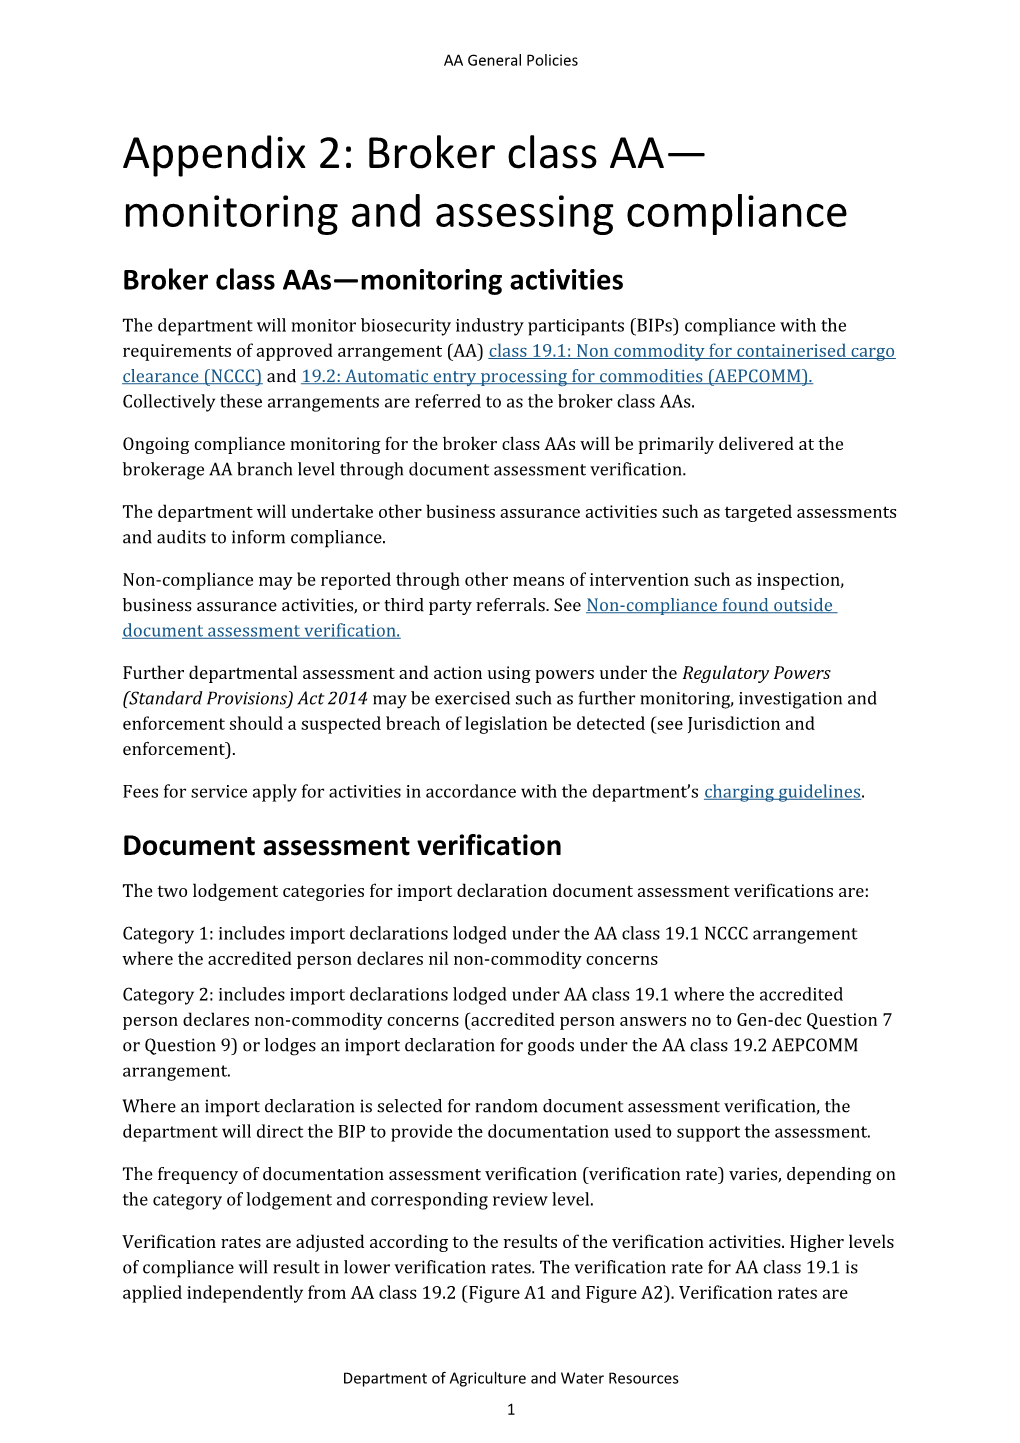 Appendix 2: Broker Class AA Monitoring and Assessing Compliance